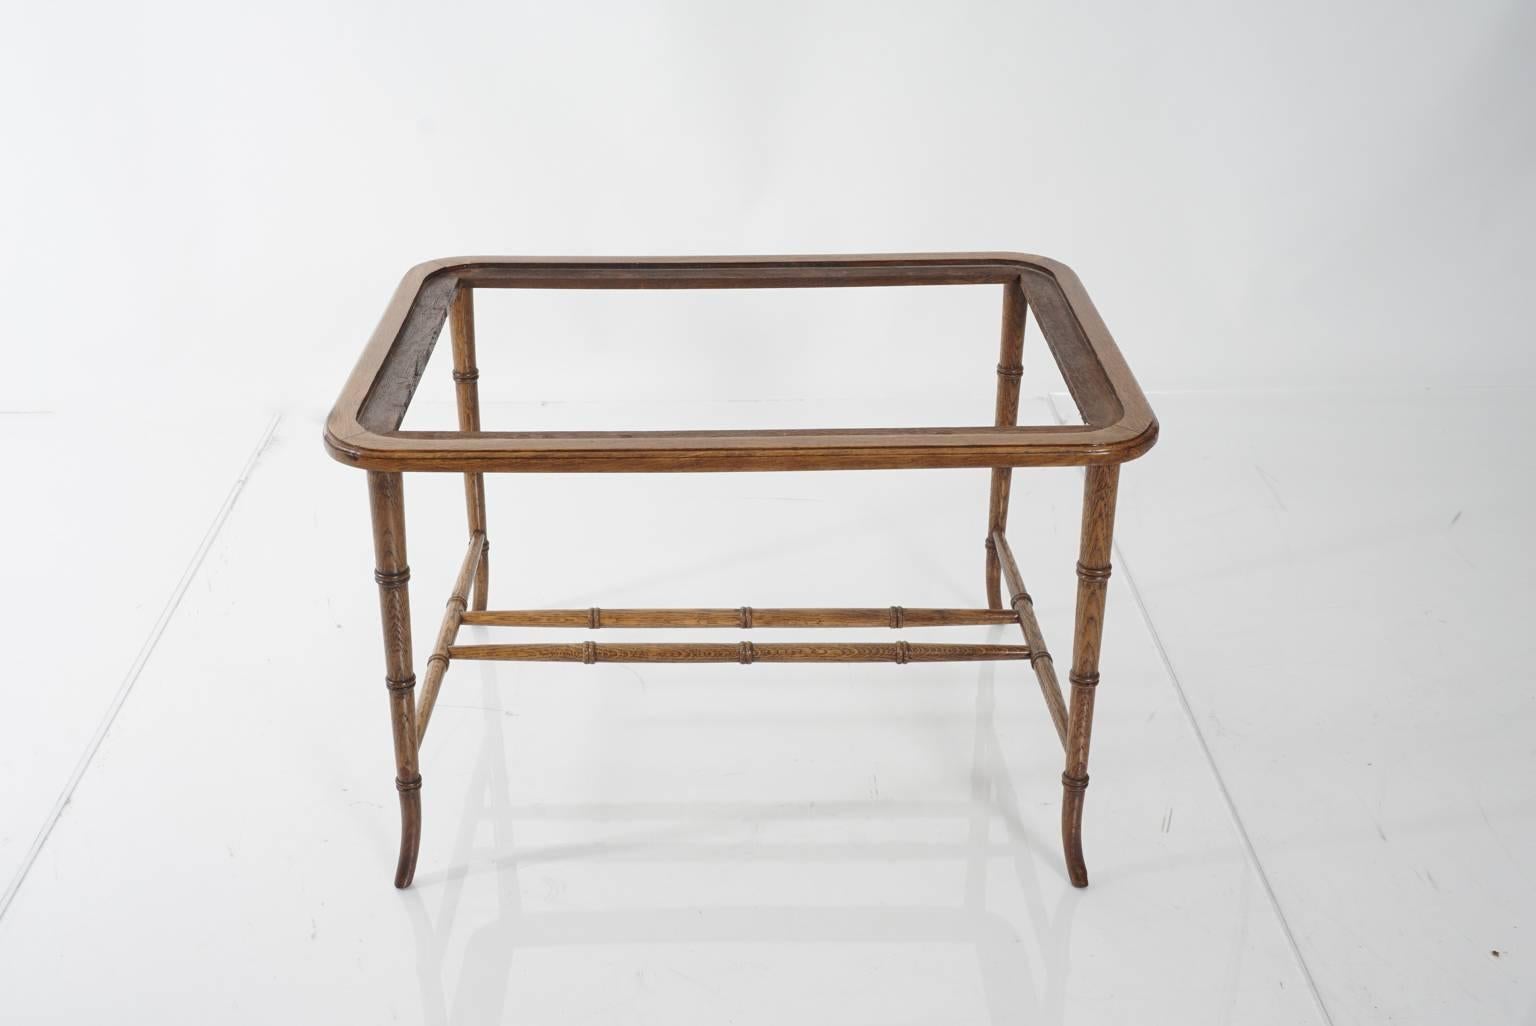 Great Britain (UK) Faux Bamboo Tray Table